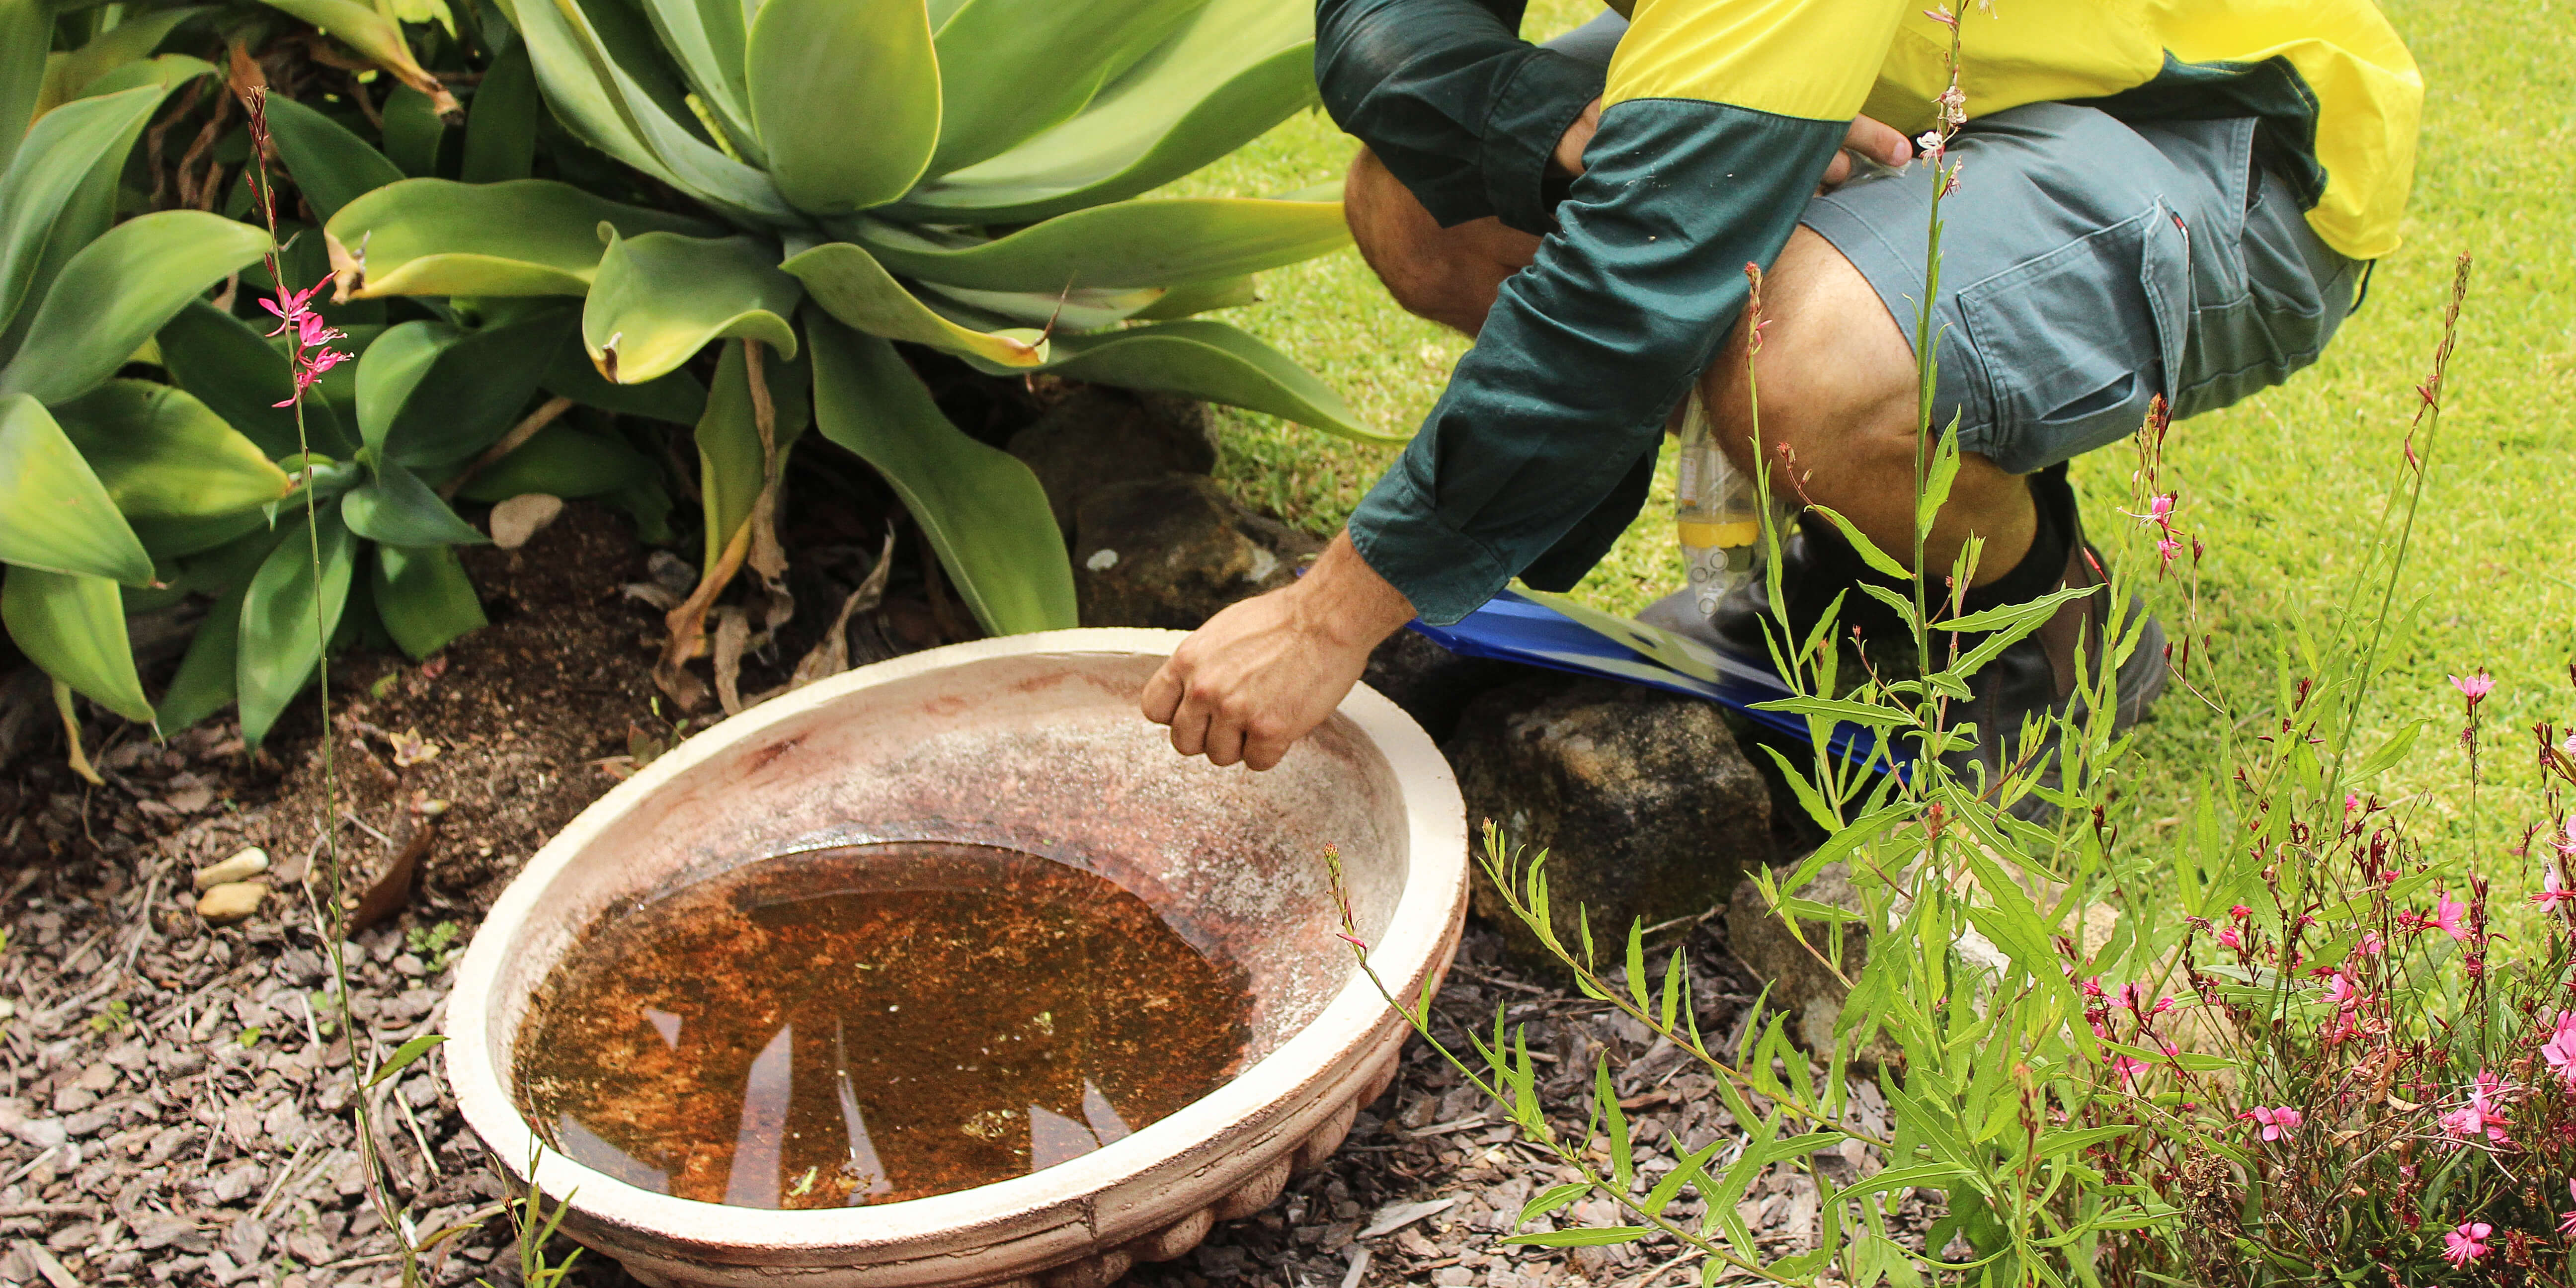 close up view of a man crouching over a large garden dish full of water